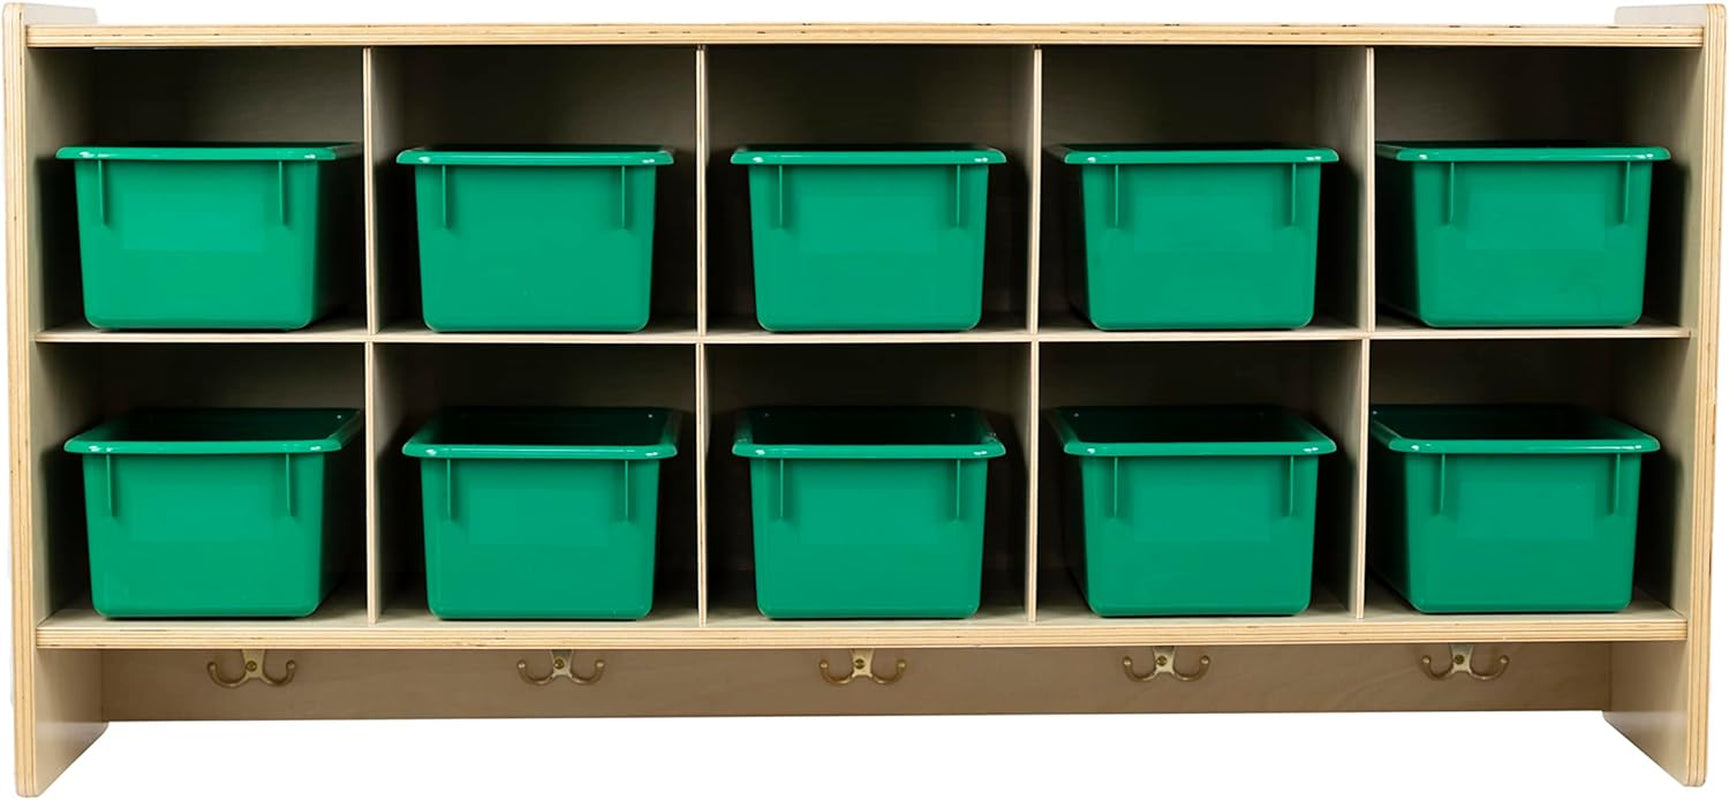 Cubby Storage Organizer Cubes, 10 Cubbies with Coat Hooks, Hanging Wall Cubby Shelf for Kids Toys, Daycare, Classroom, 47-Inch Width